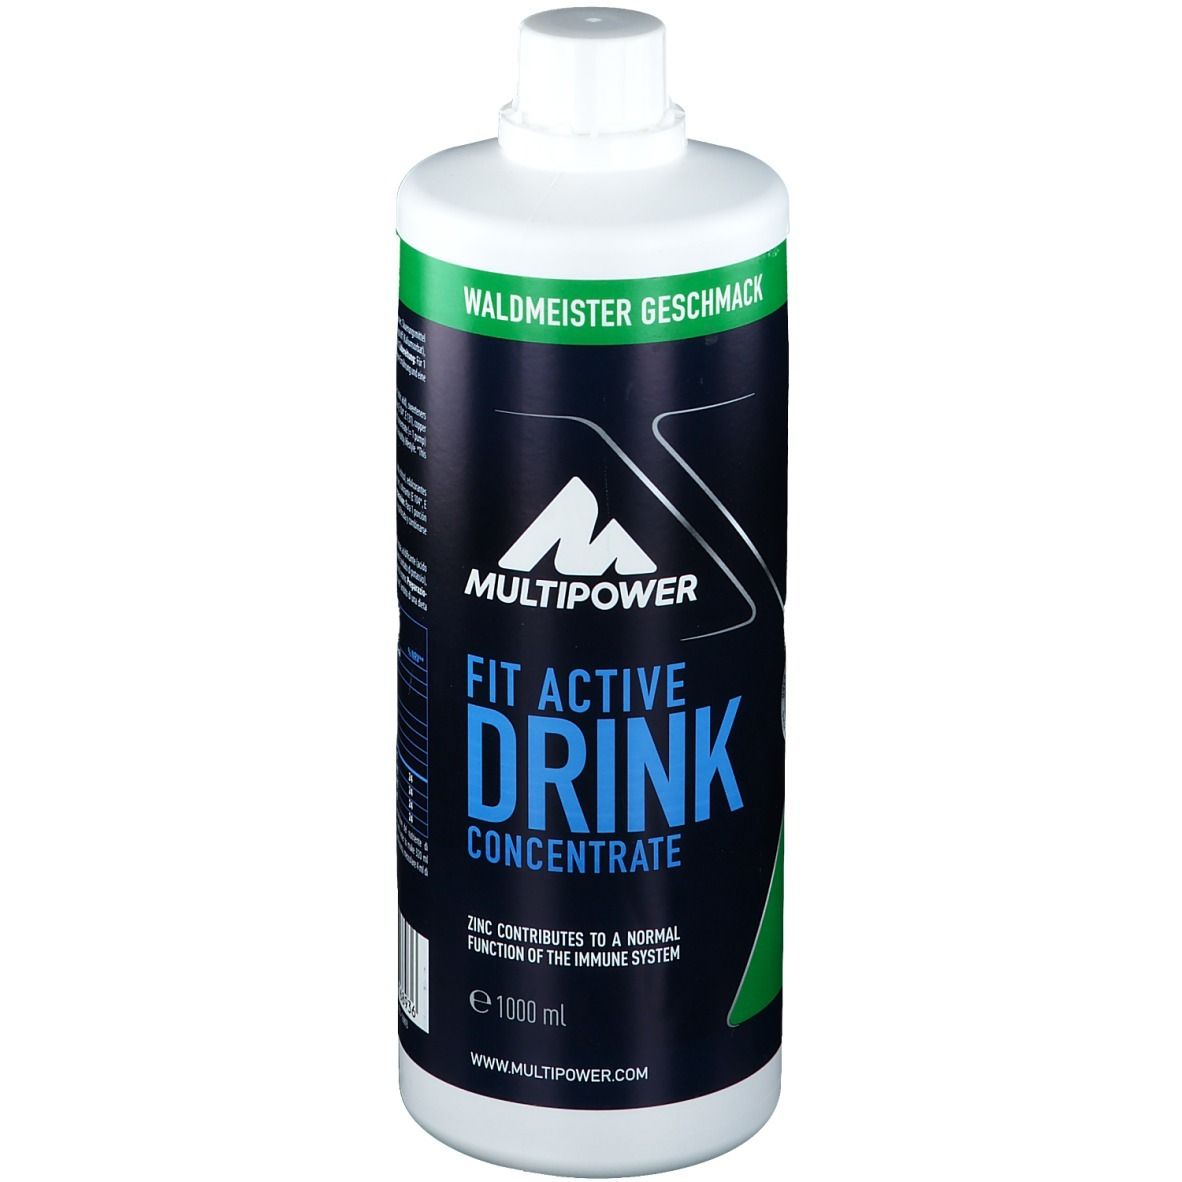 Multipower Fit Active Drink Concentrate, Waldmeister